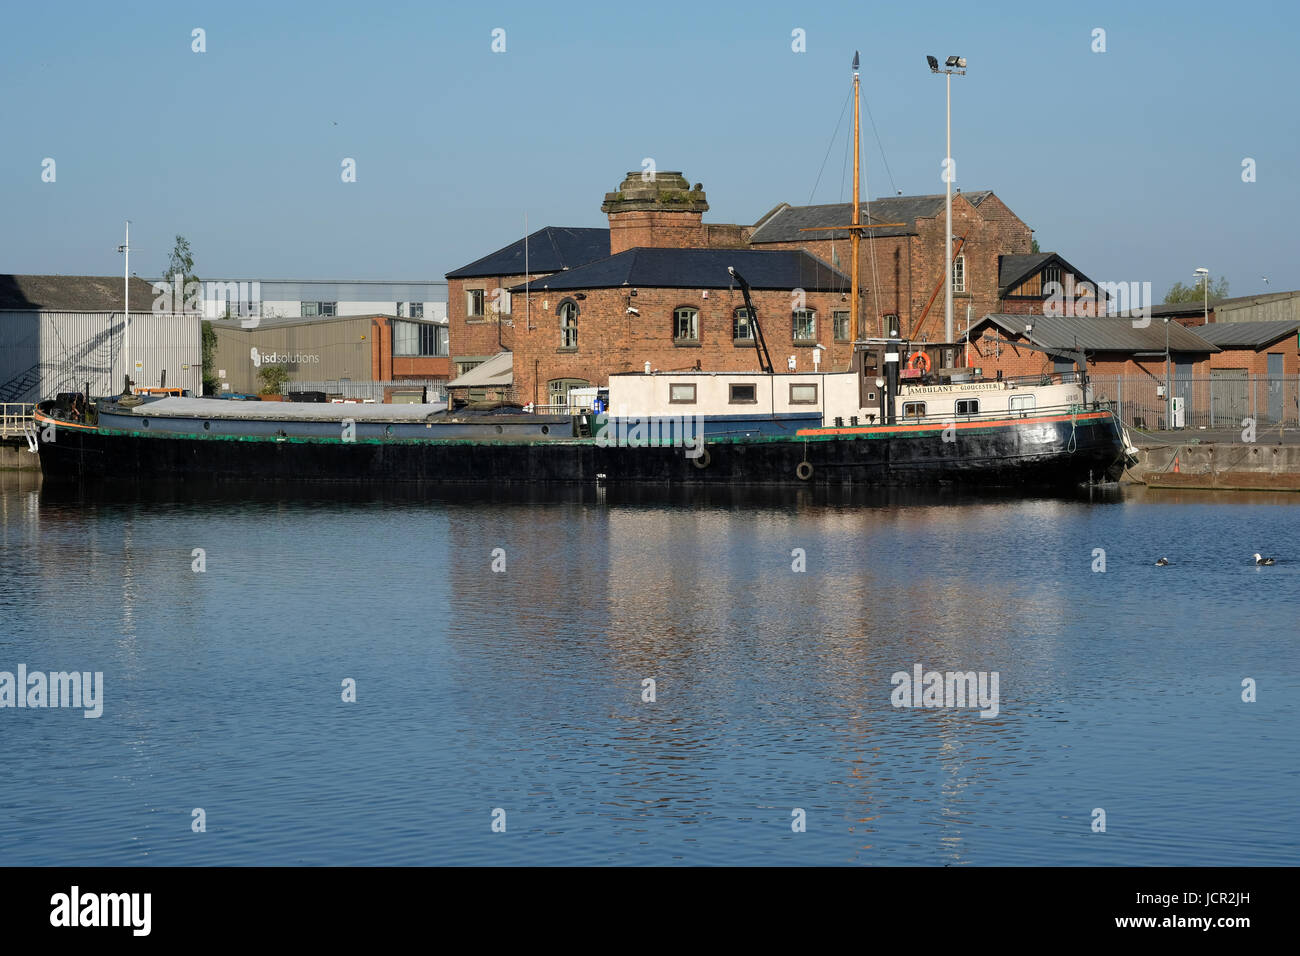 Houseboat Ambulant in Gloucester docks for maintenance and repairs Stock Photo